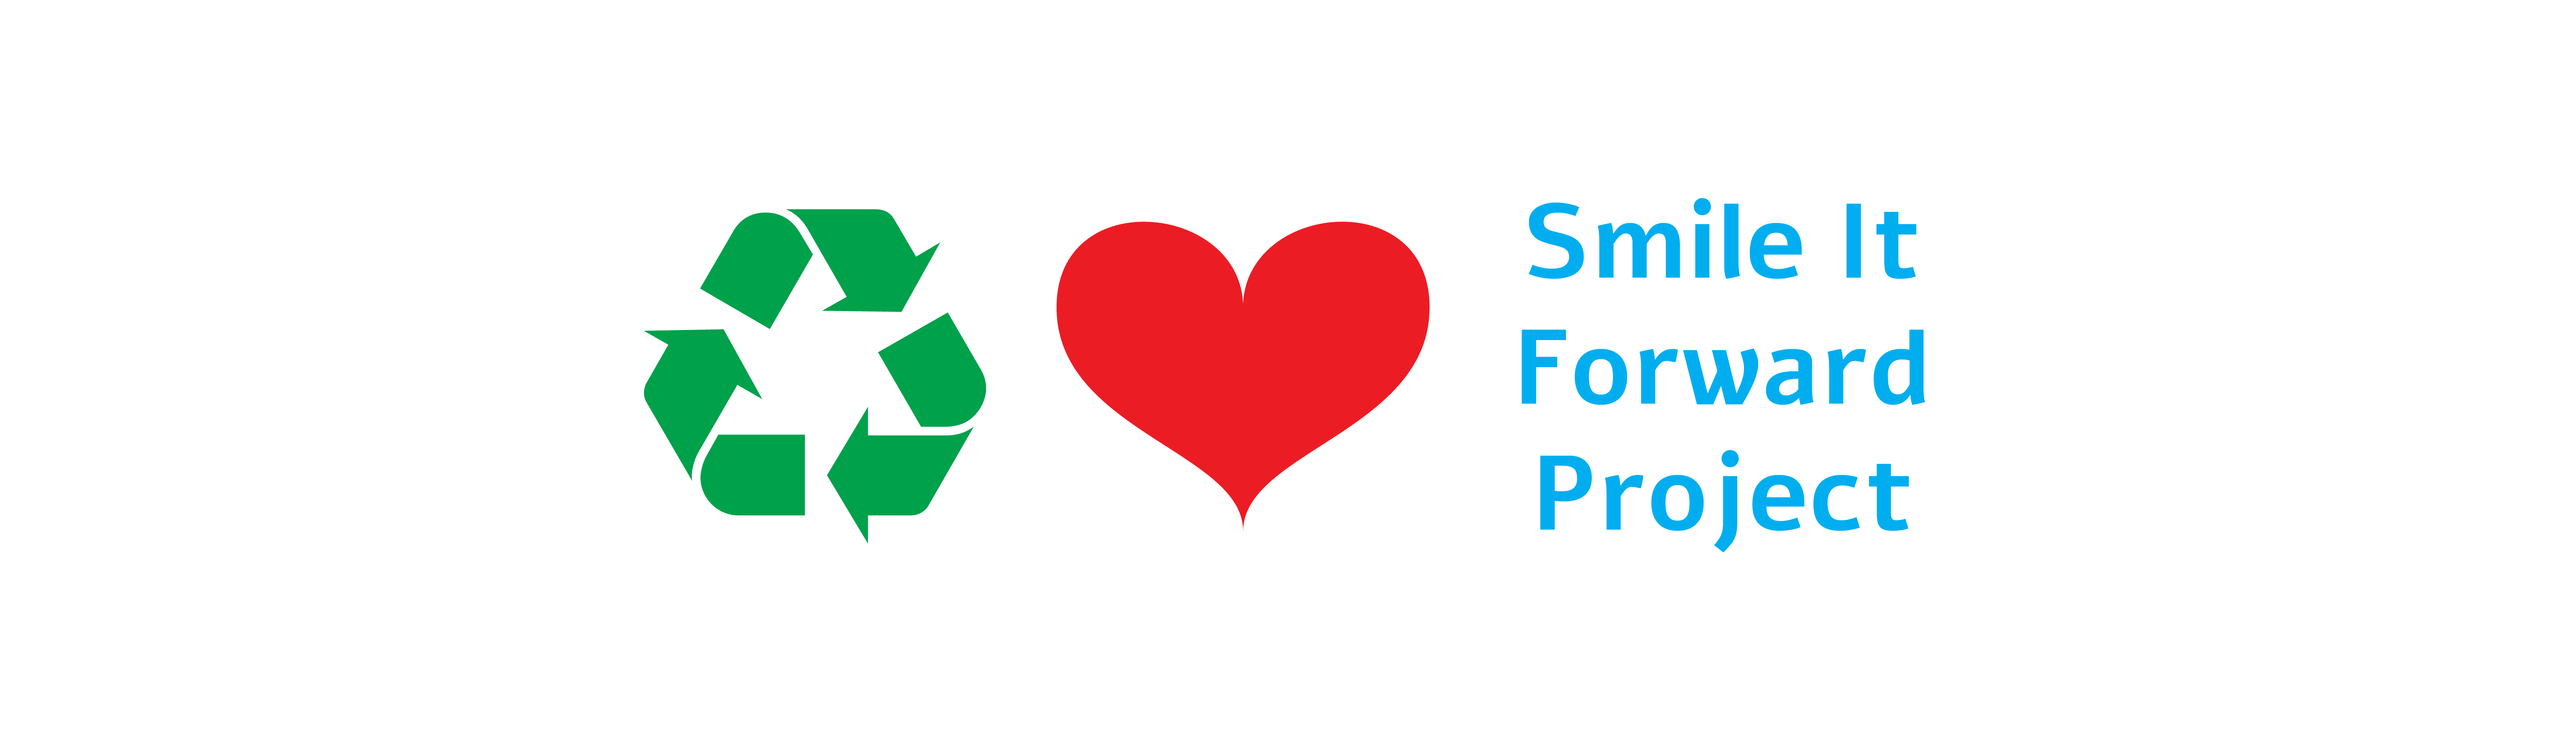 Smile It Forward Project